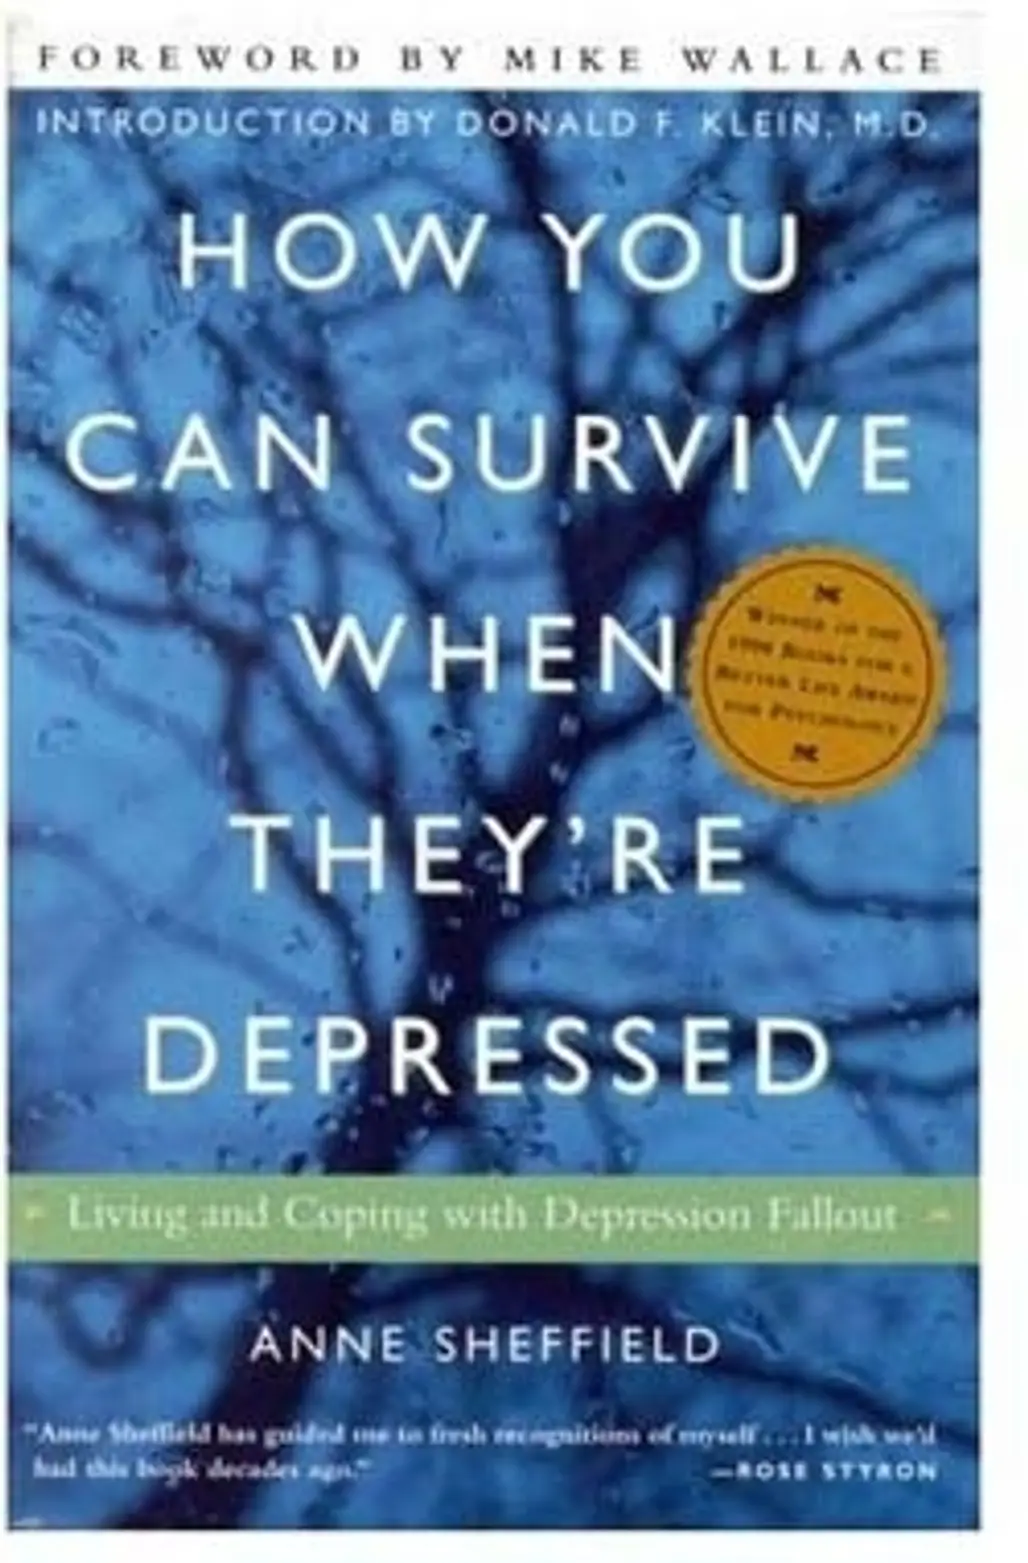 How You Can Survive when They’re Depressed by Anne Sheffield